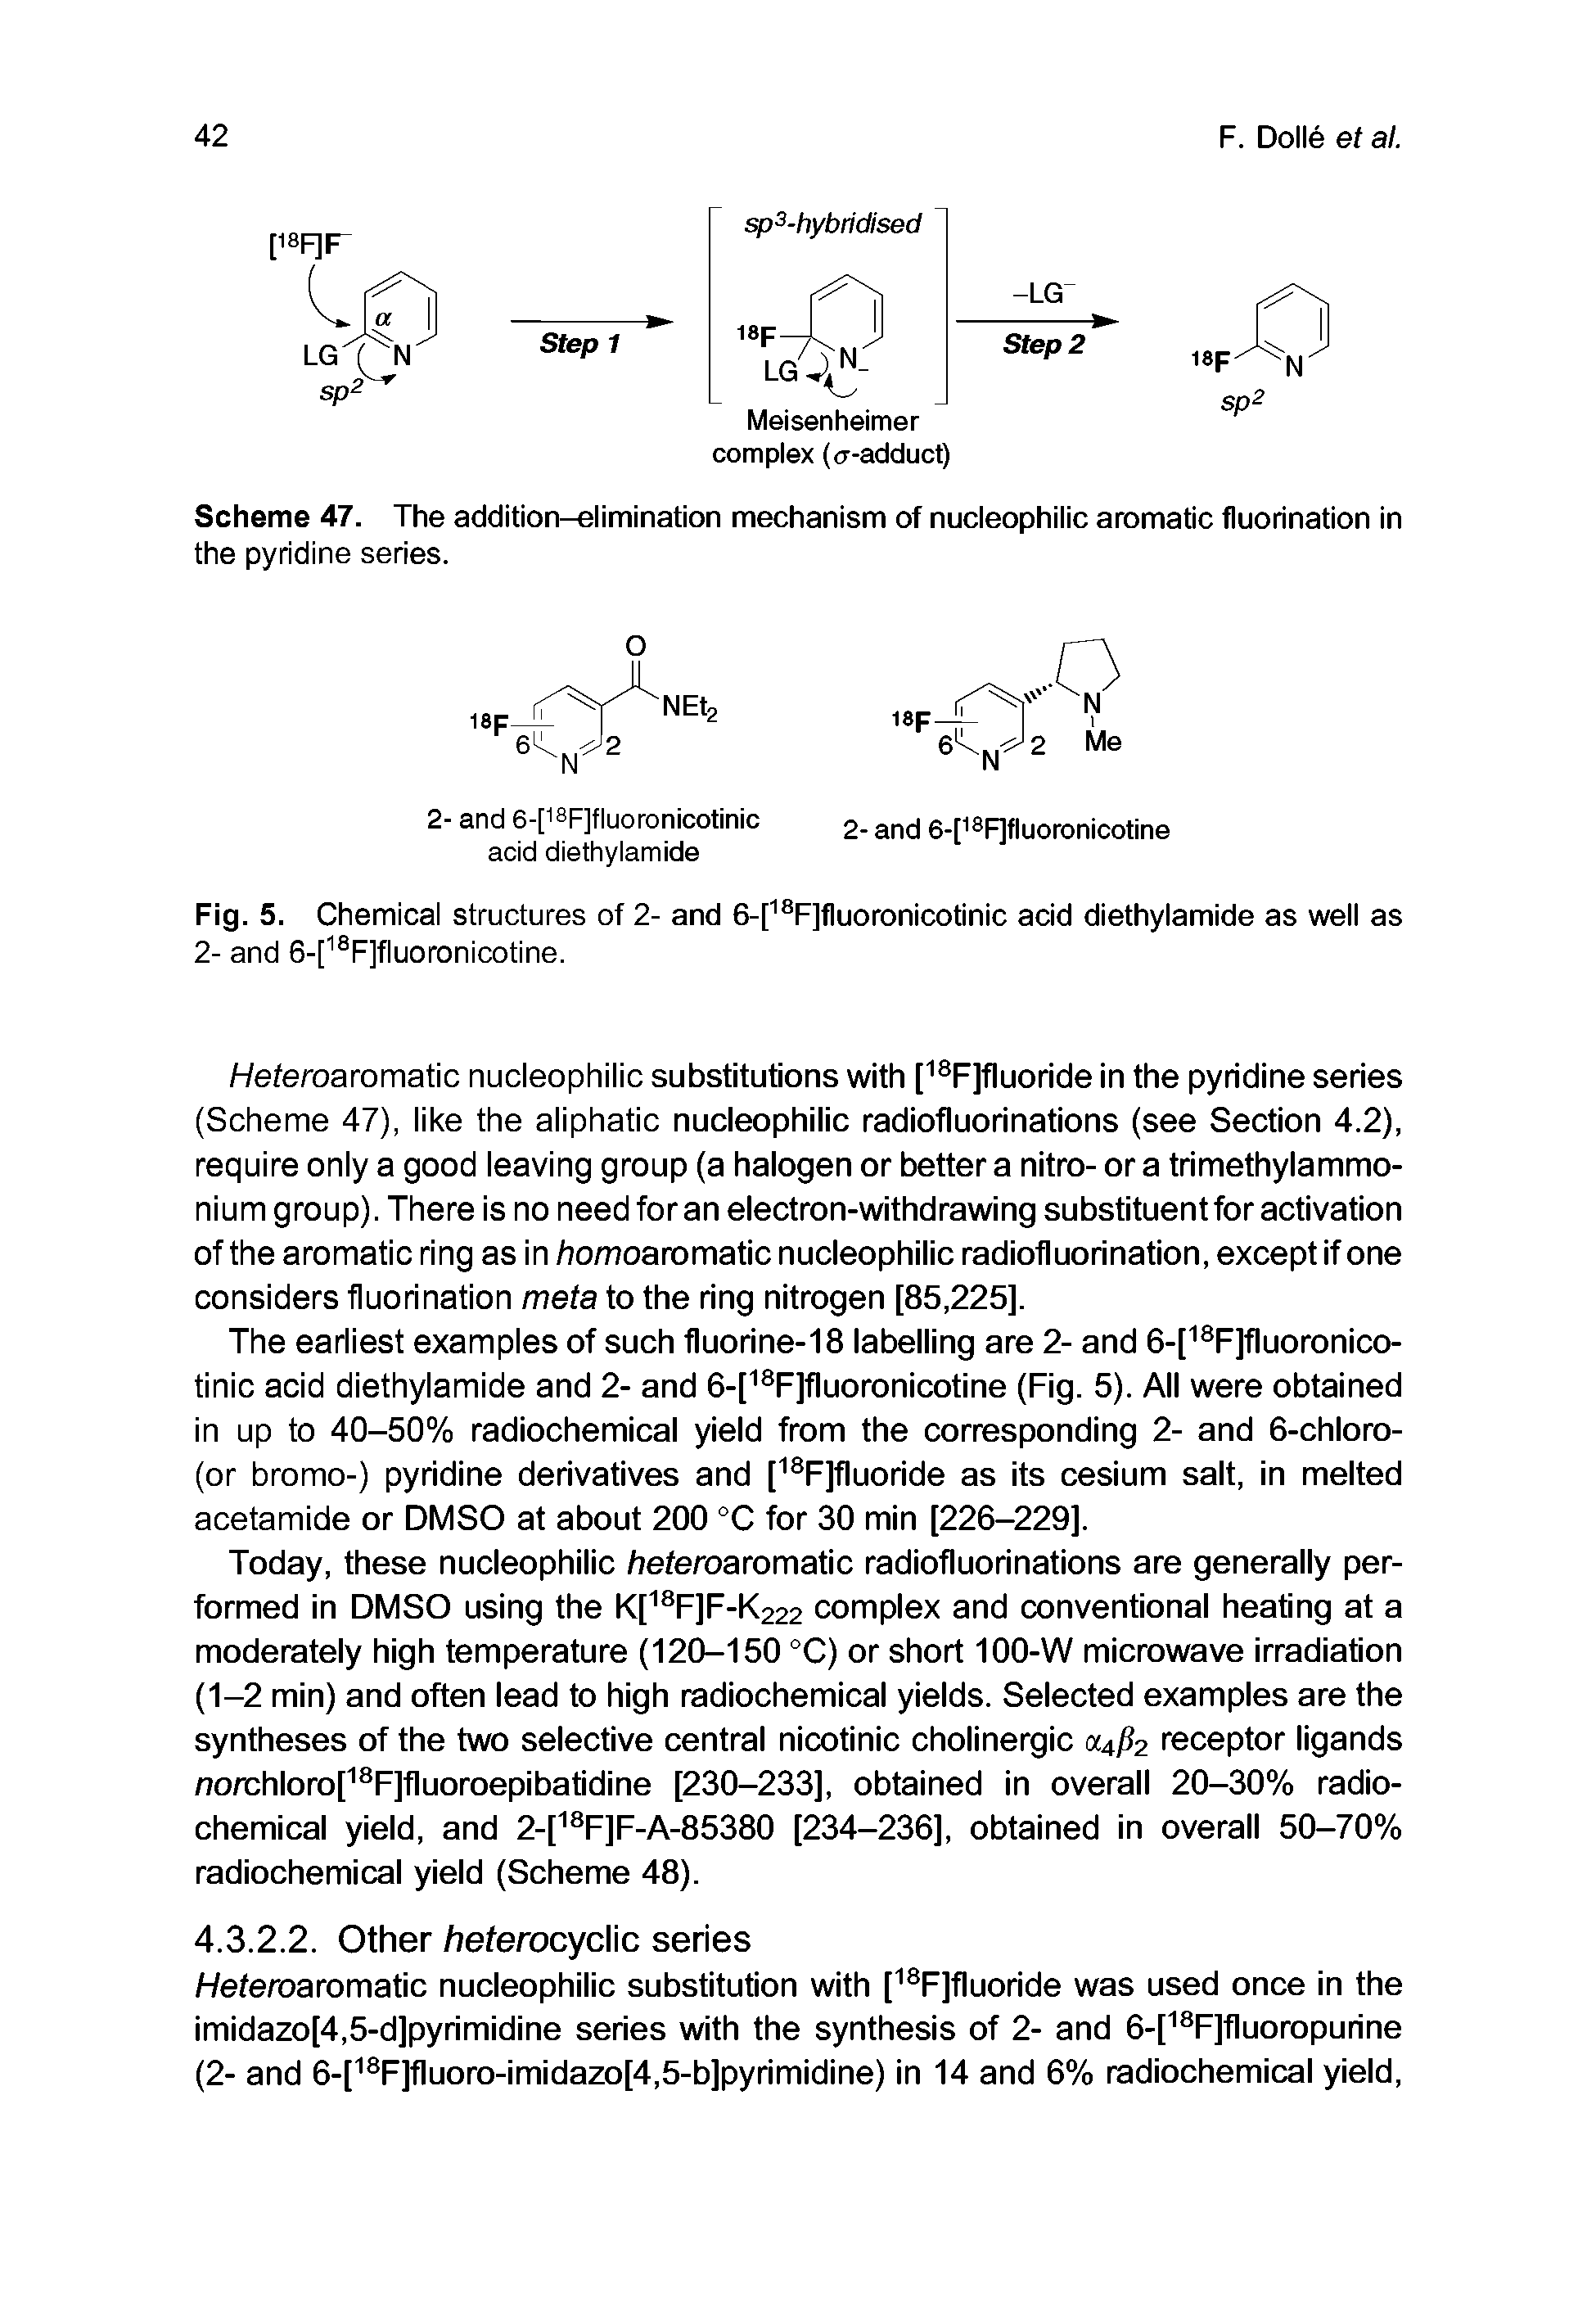 Fig. 5. Chemical structures of 2- and 6-[ F]fluoronicotinic acid diethylamide as well as 2- and 6-[ F]fluoronicotine.